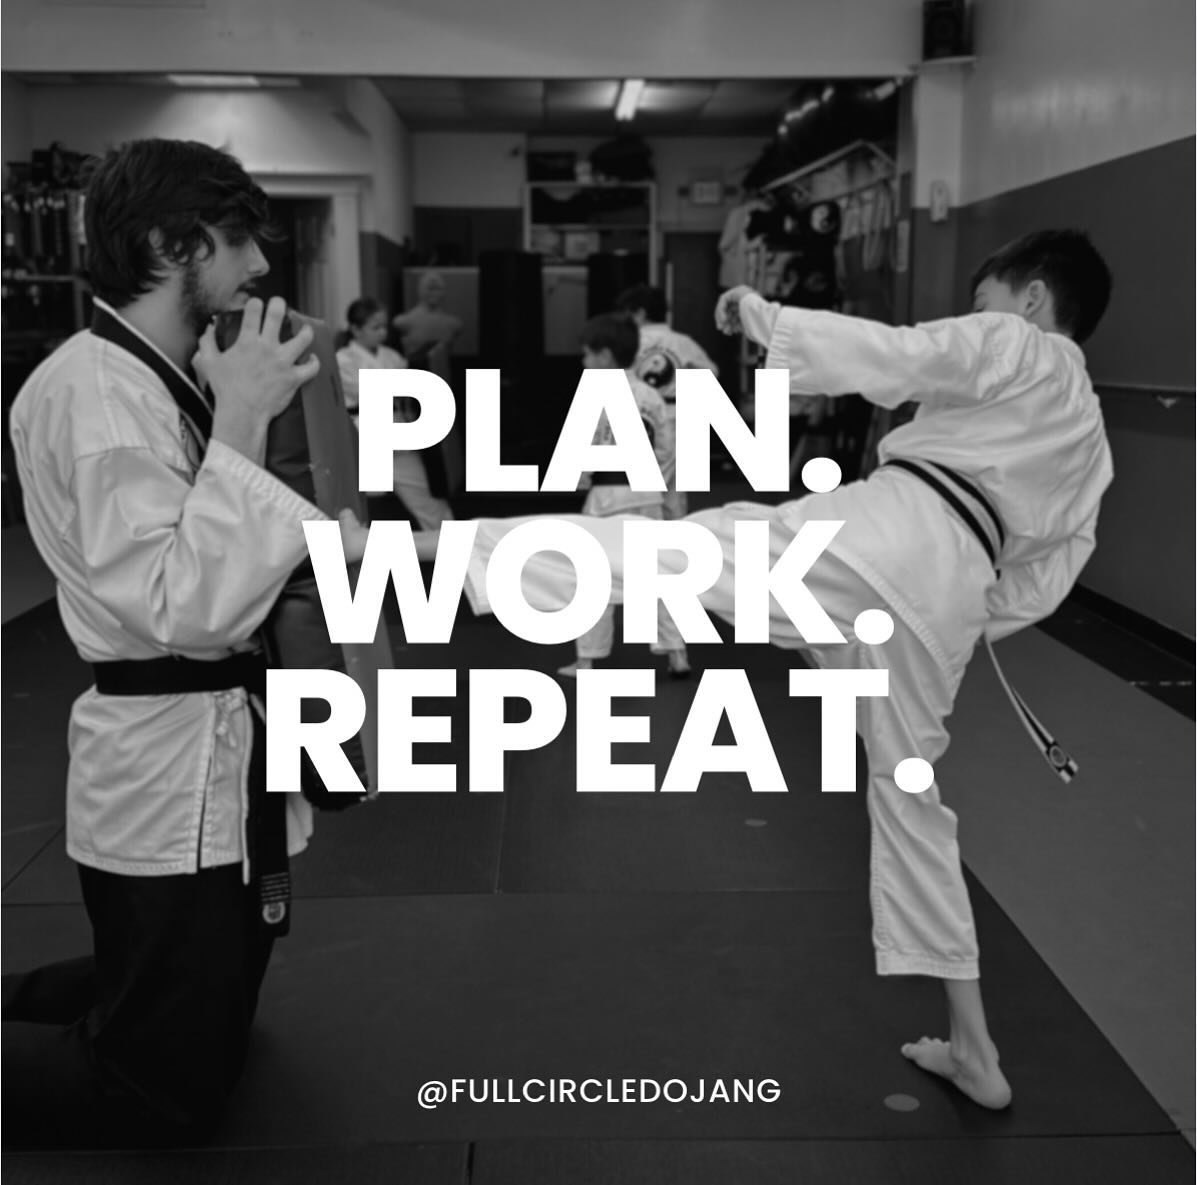 Getting ready for the weekend, but still working hard!
*
Reminder for Today&rsquo;s (Friday) Schedule:
🐉 Dragons 4:30-5:00
🥋 All Levels 5:00-5:45
*
Reminder for Tomorrow&rsquo;s (Saturday) Schedule:
🐉 Dragons 9:30-10:00
🥋 Beginners-Advanced 10:00